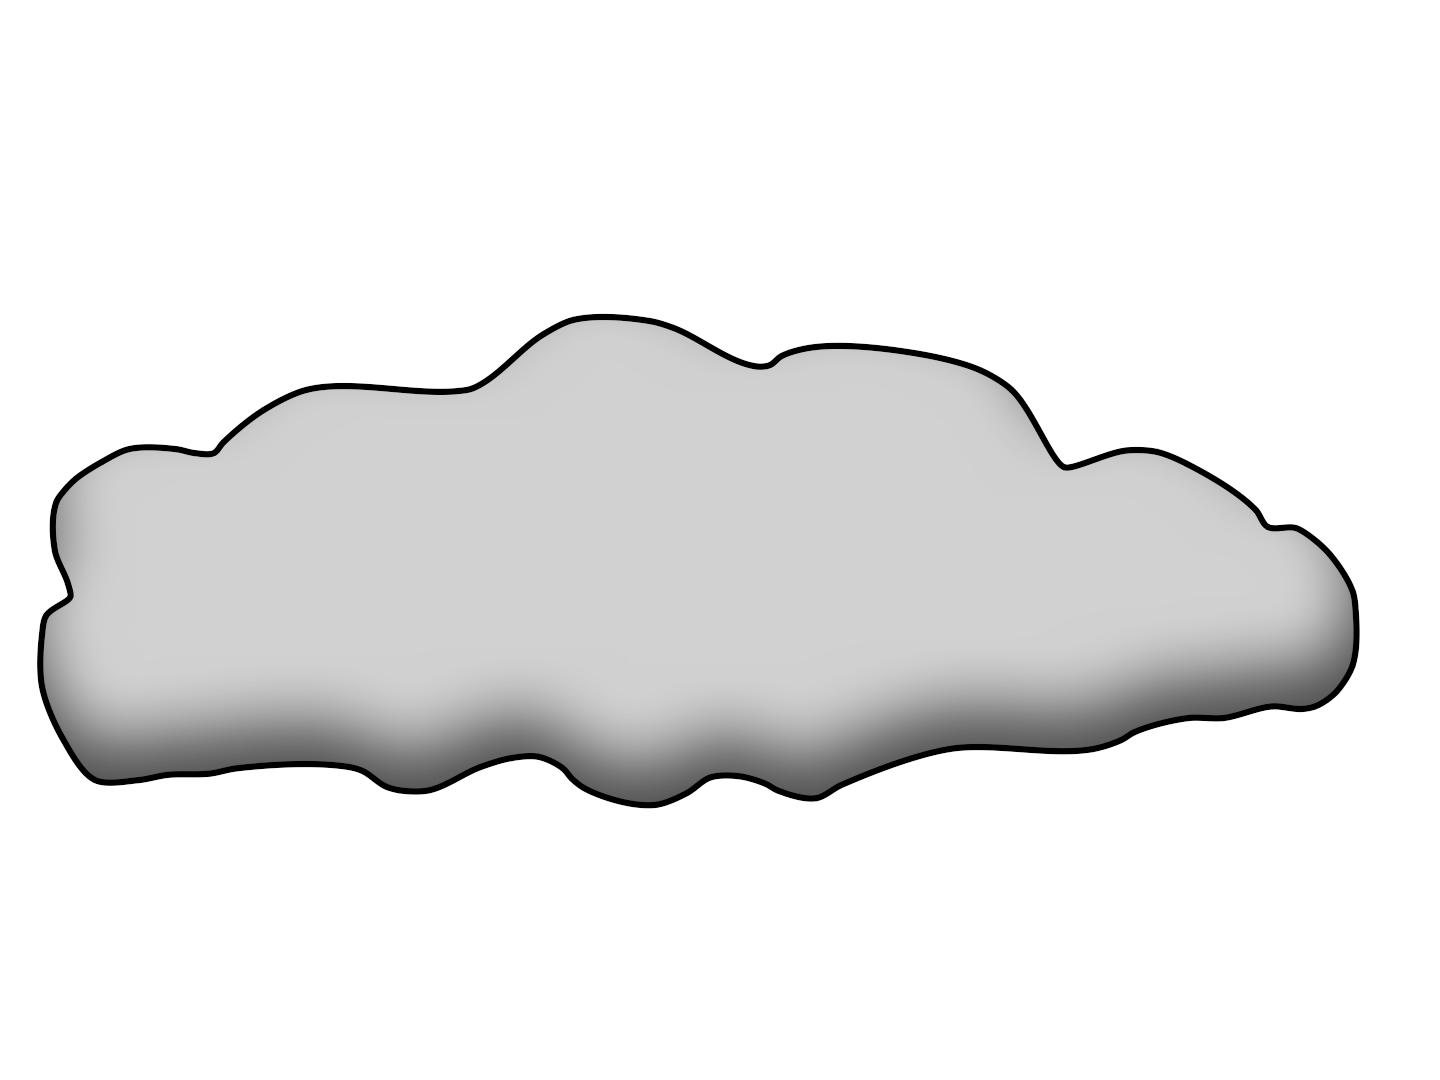 Dust clipart cloud smoke. Cliparthot particle of dark